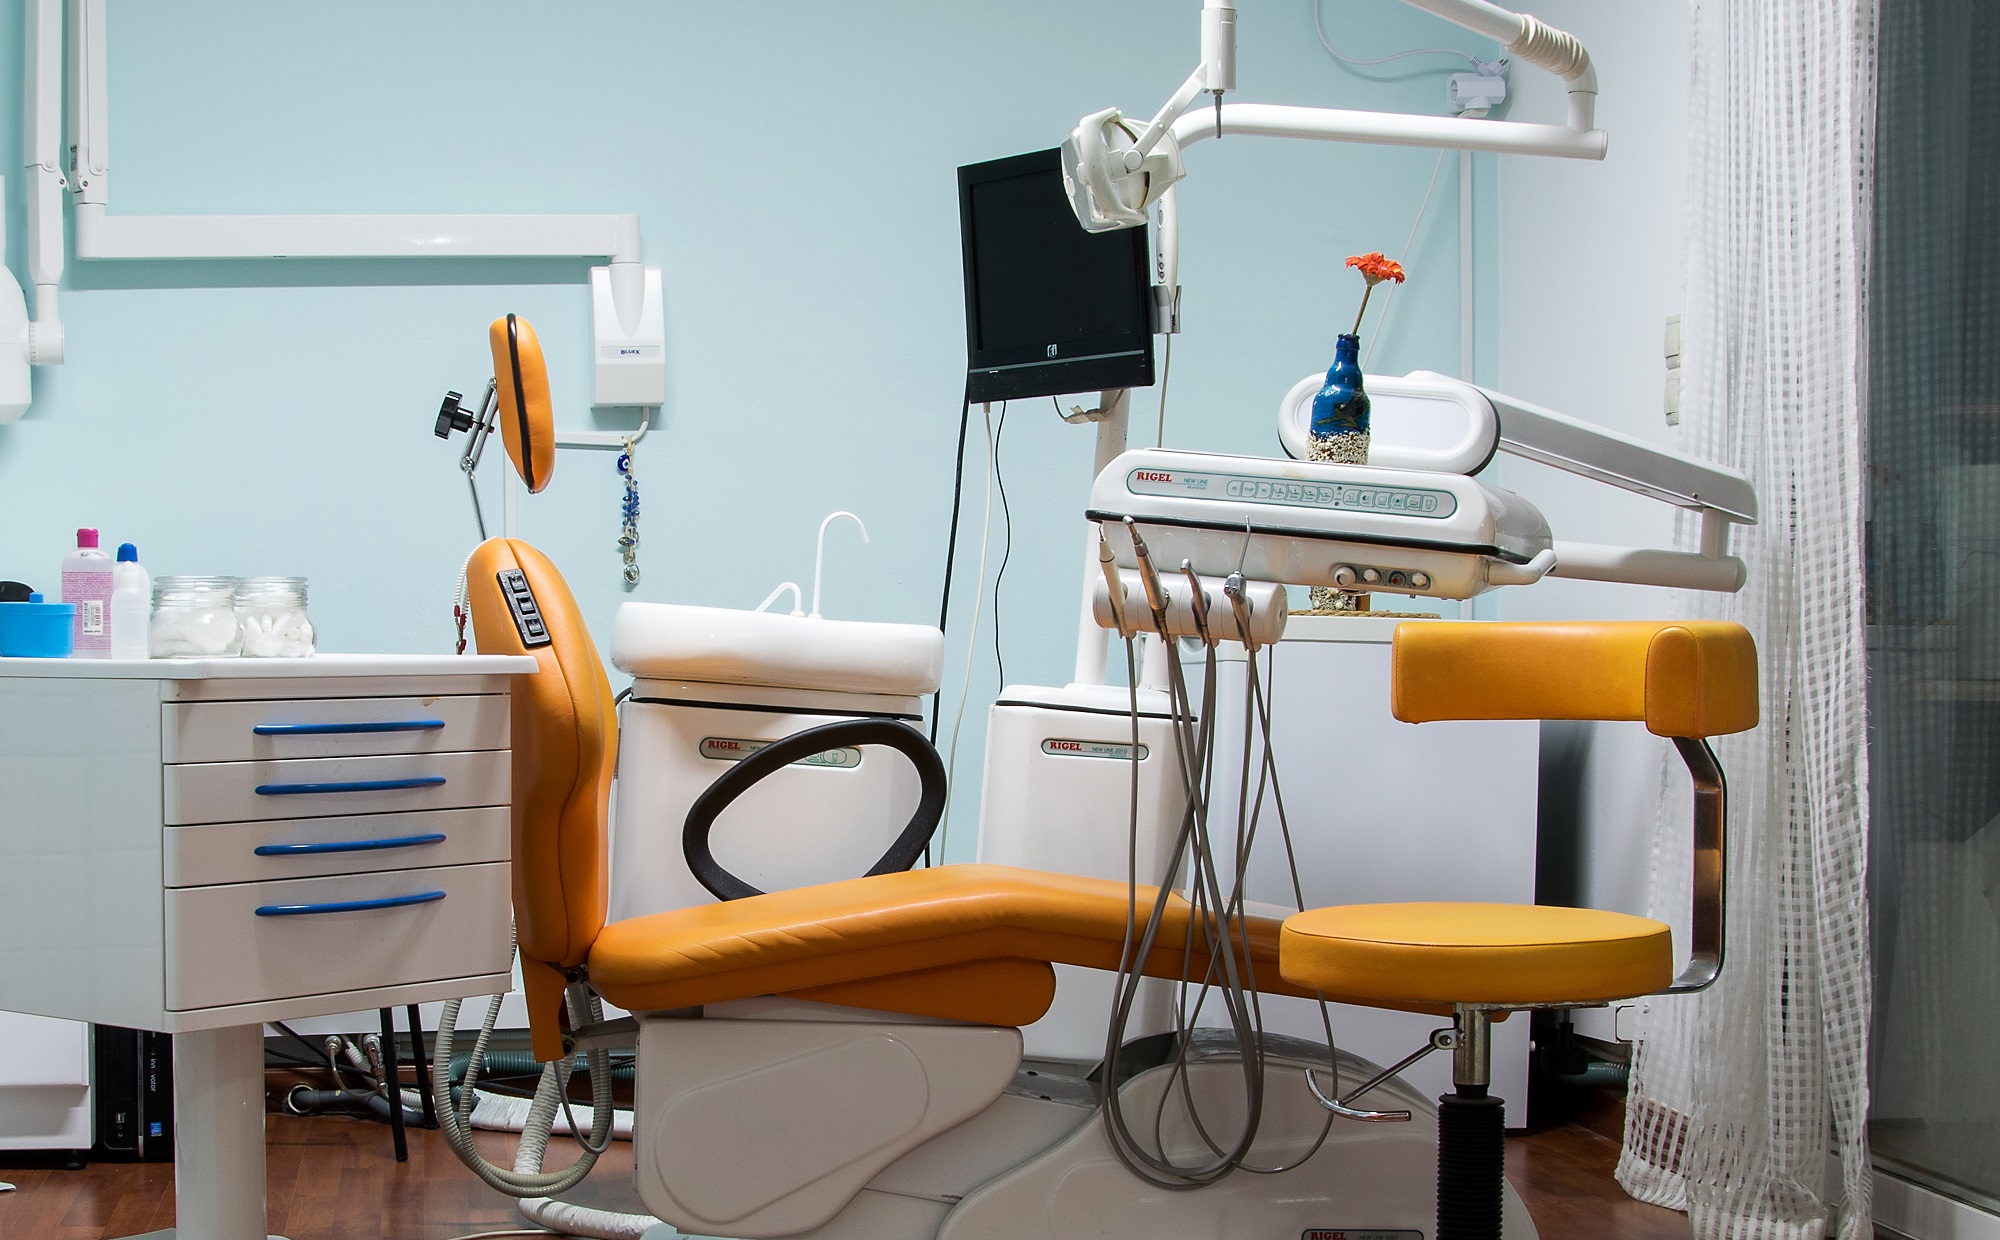 Image of the dental clinic examination chair and equipment.